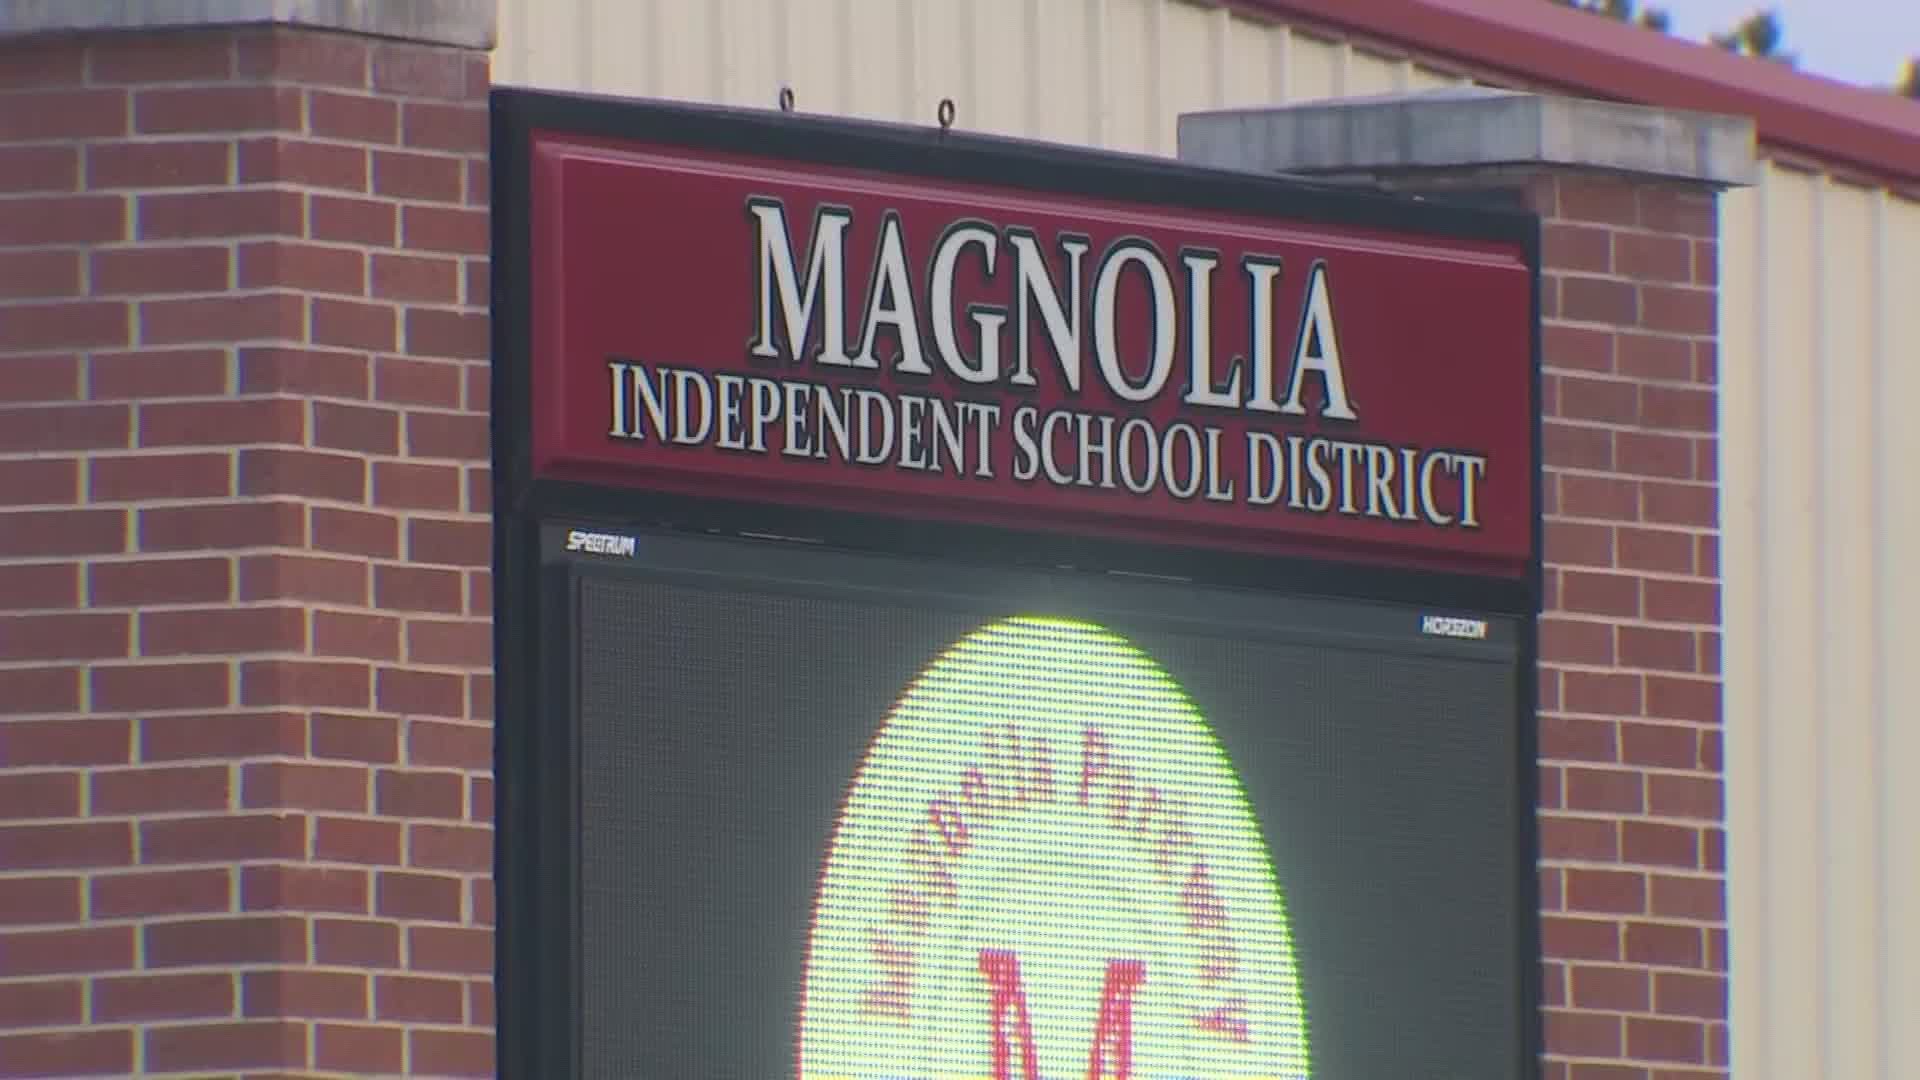 Magnolia ISD recently voted to do away with masks for students and staff beginning April 1.